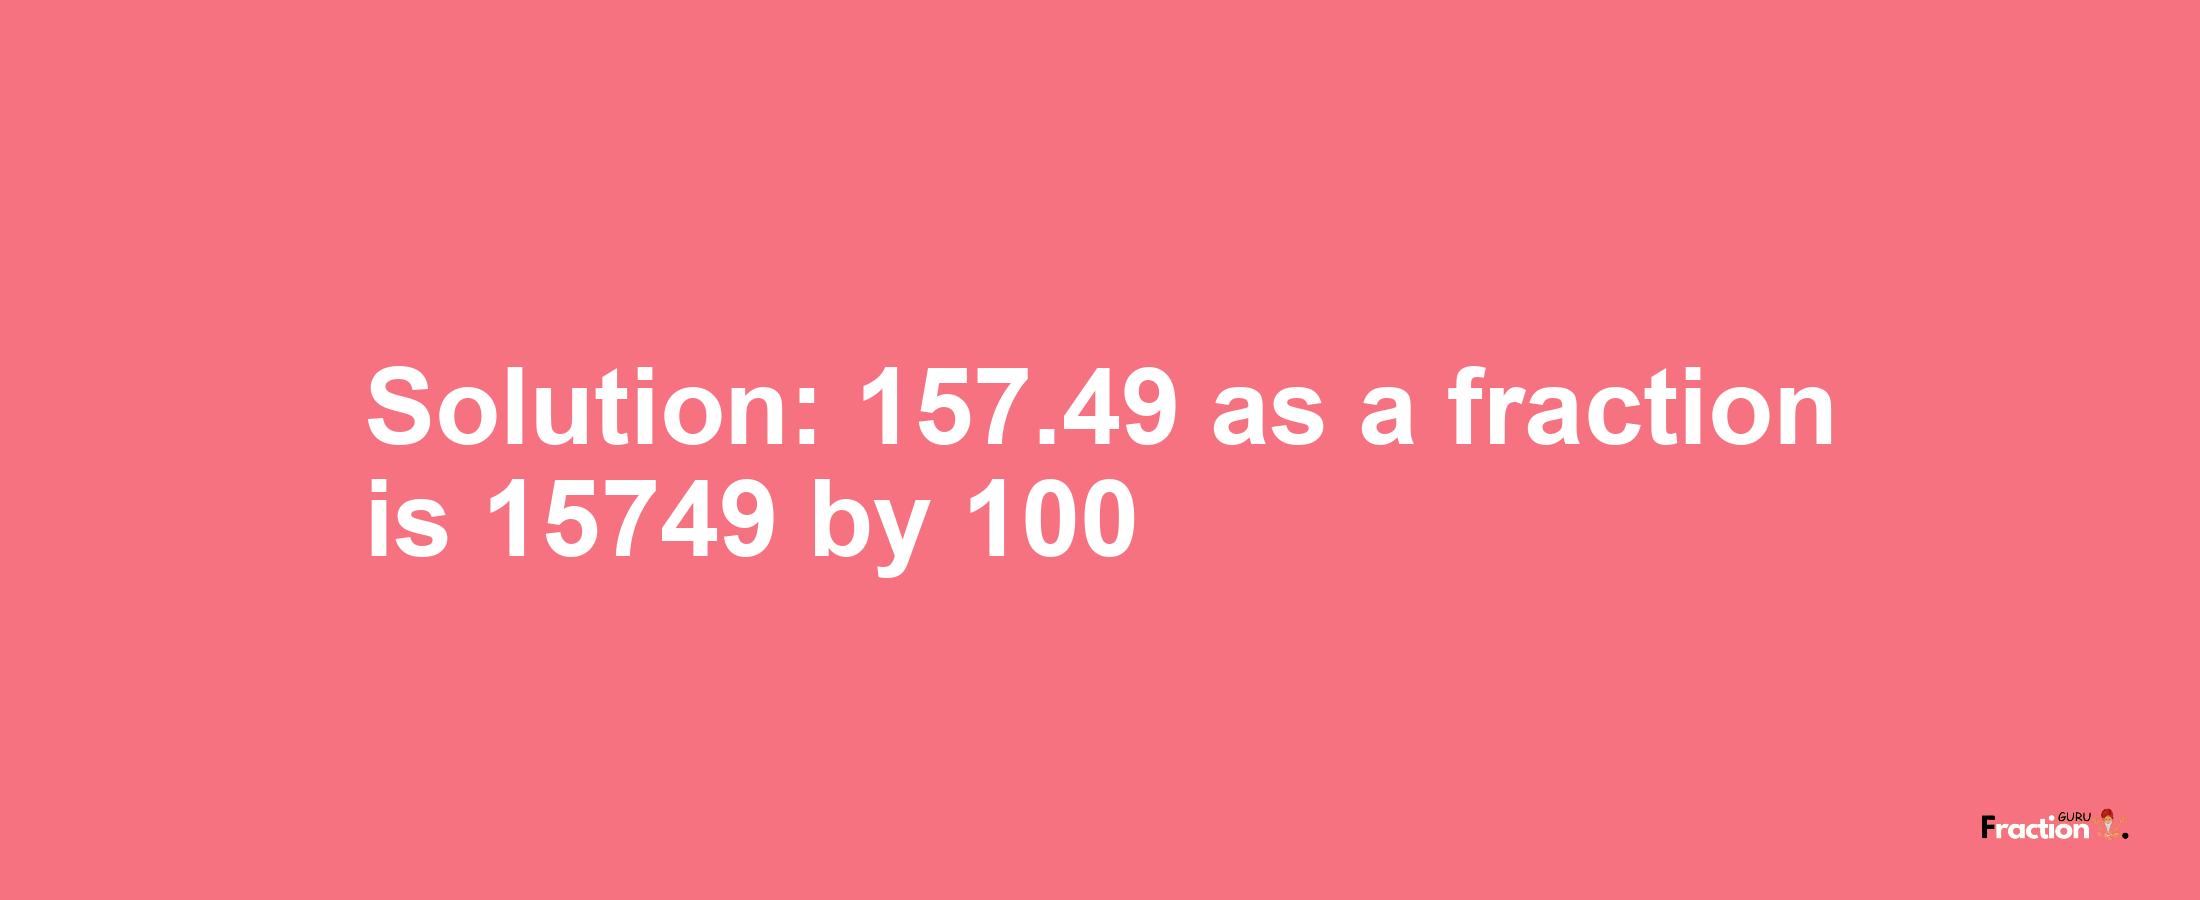 Solution:157.49 as a fraction is 15749/100